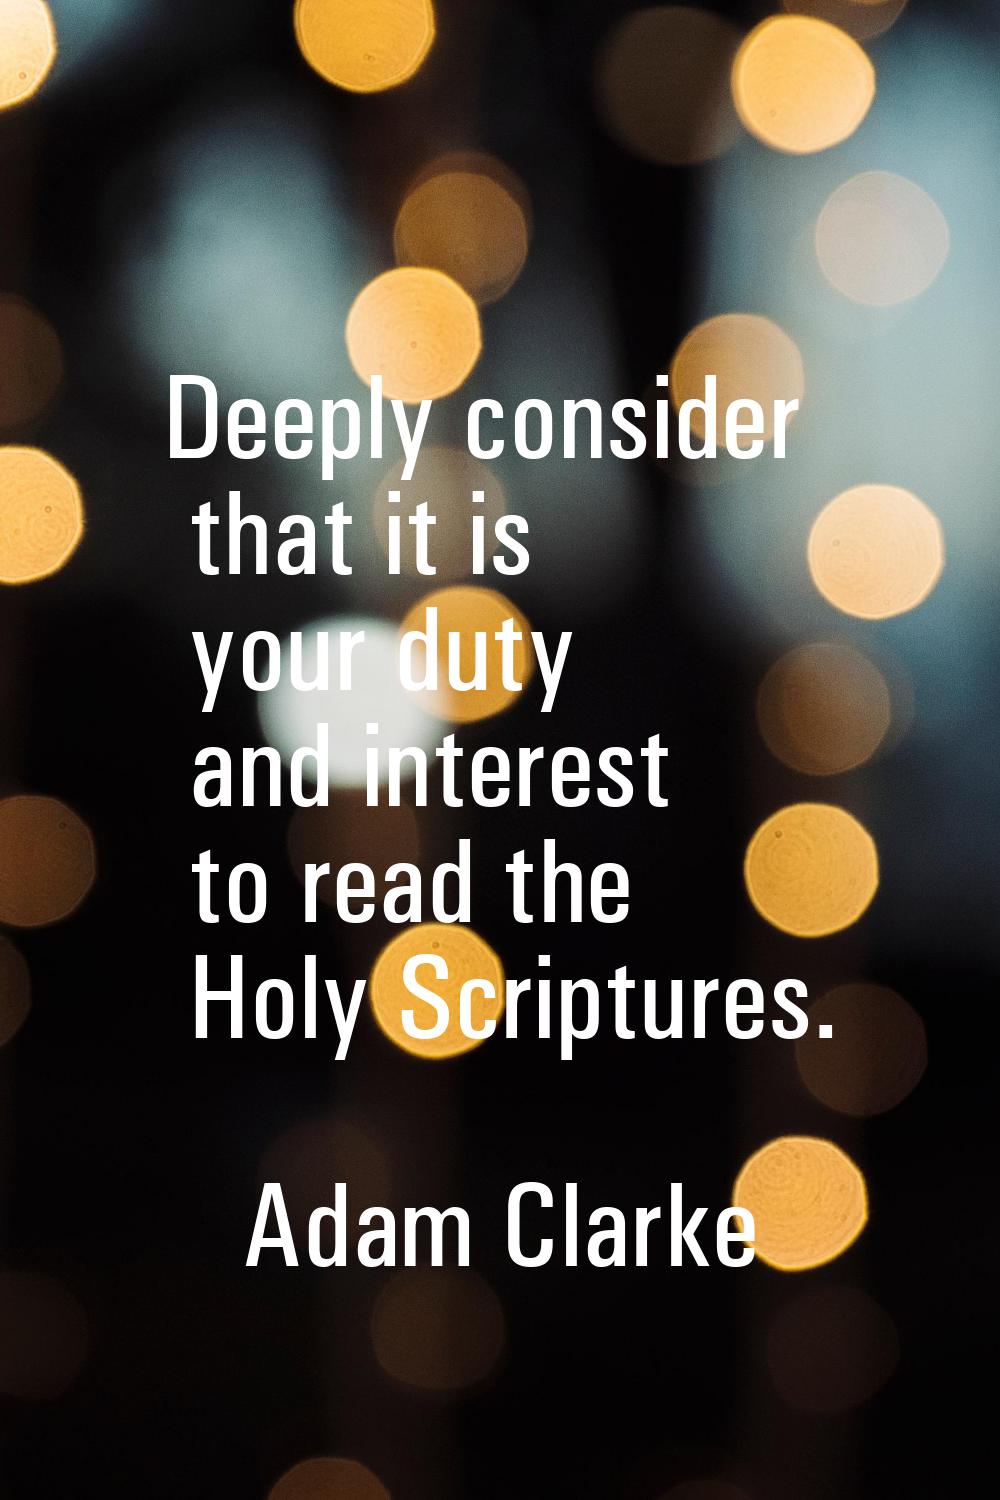 Deeply consider that it is your duty and interest to read the Holy Scriptures.